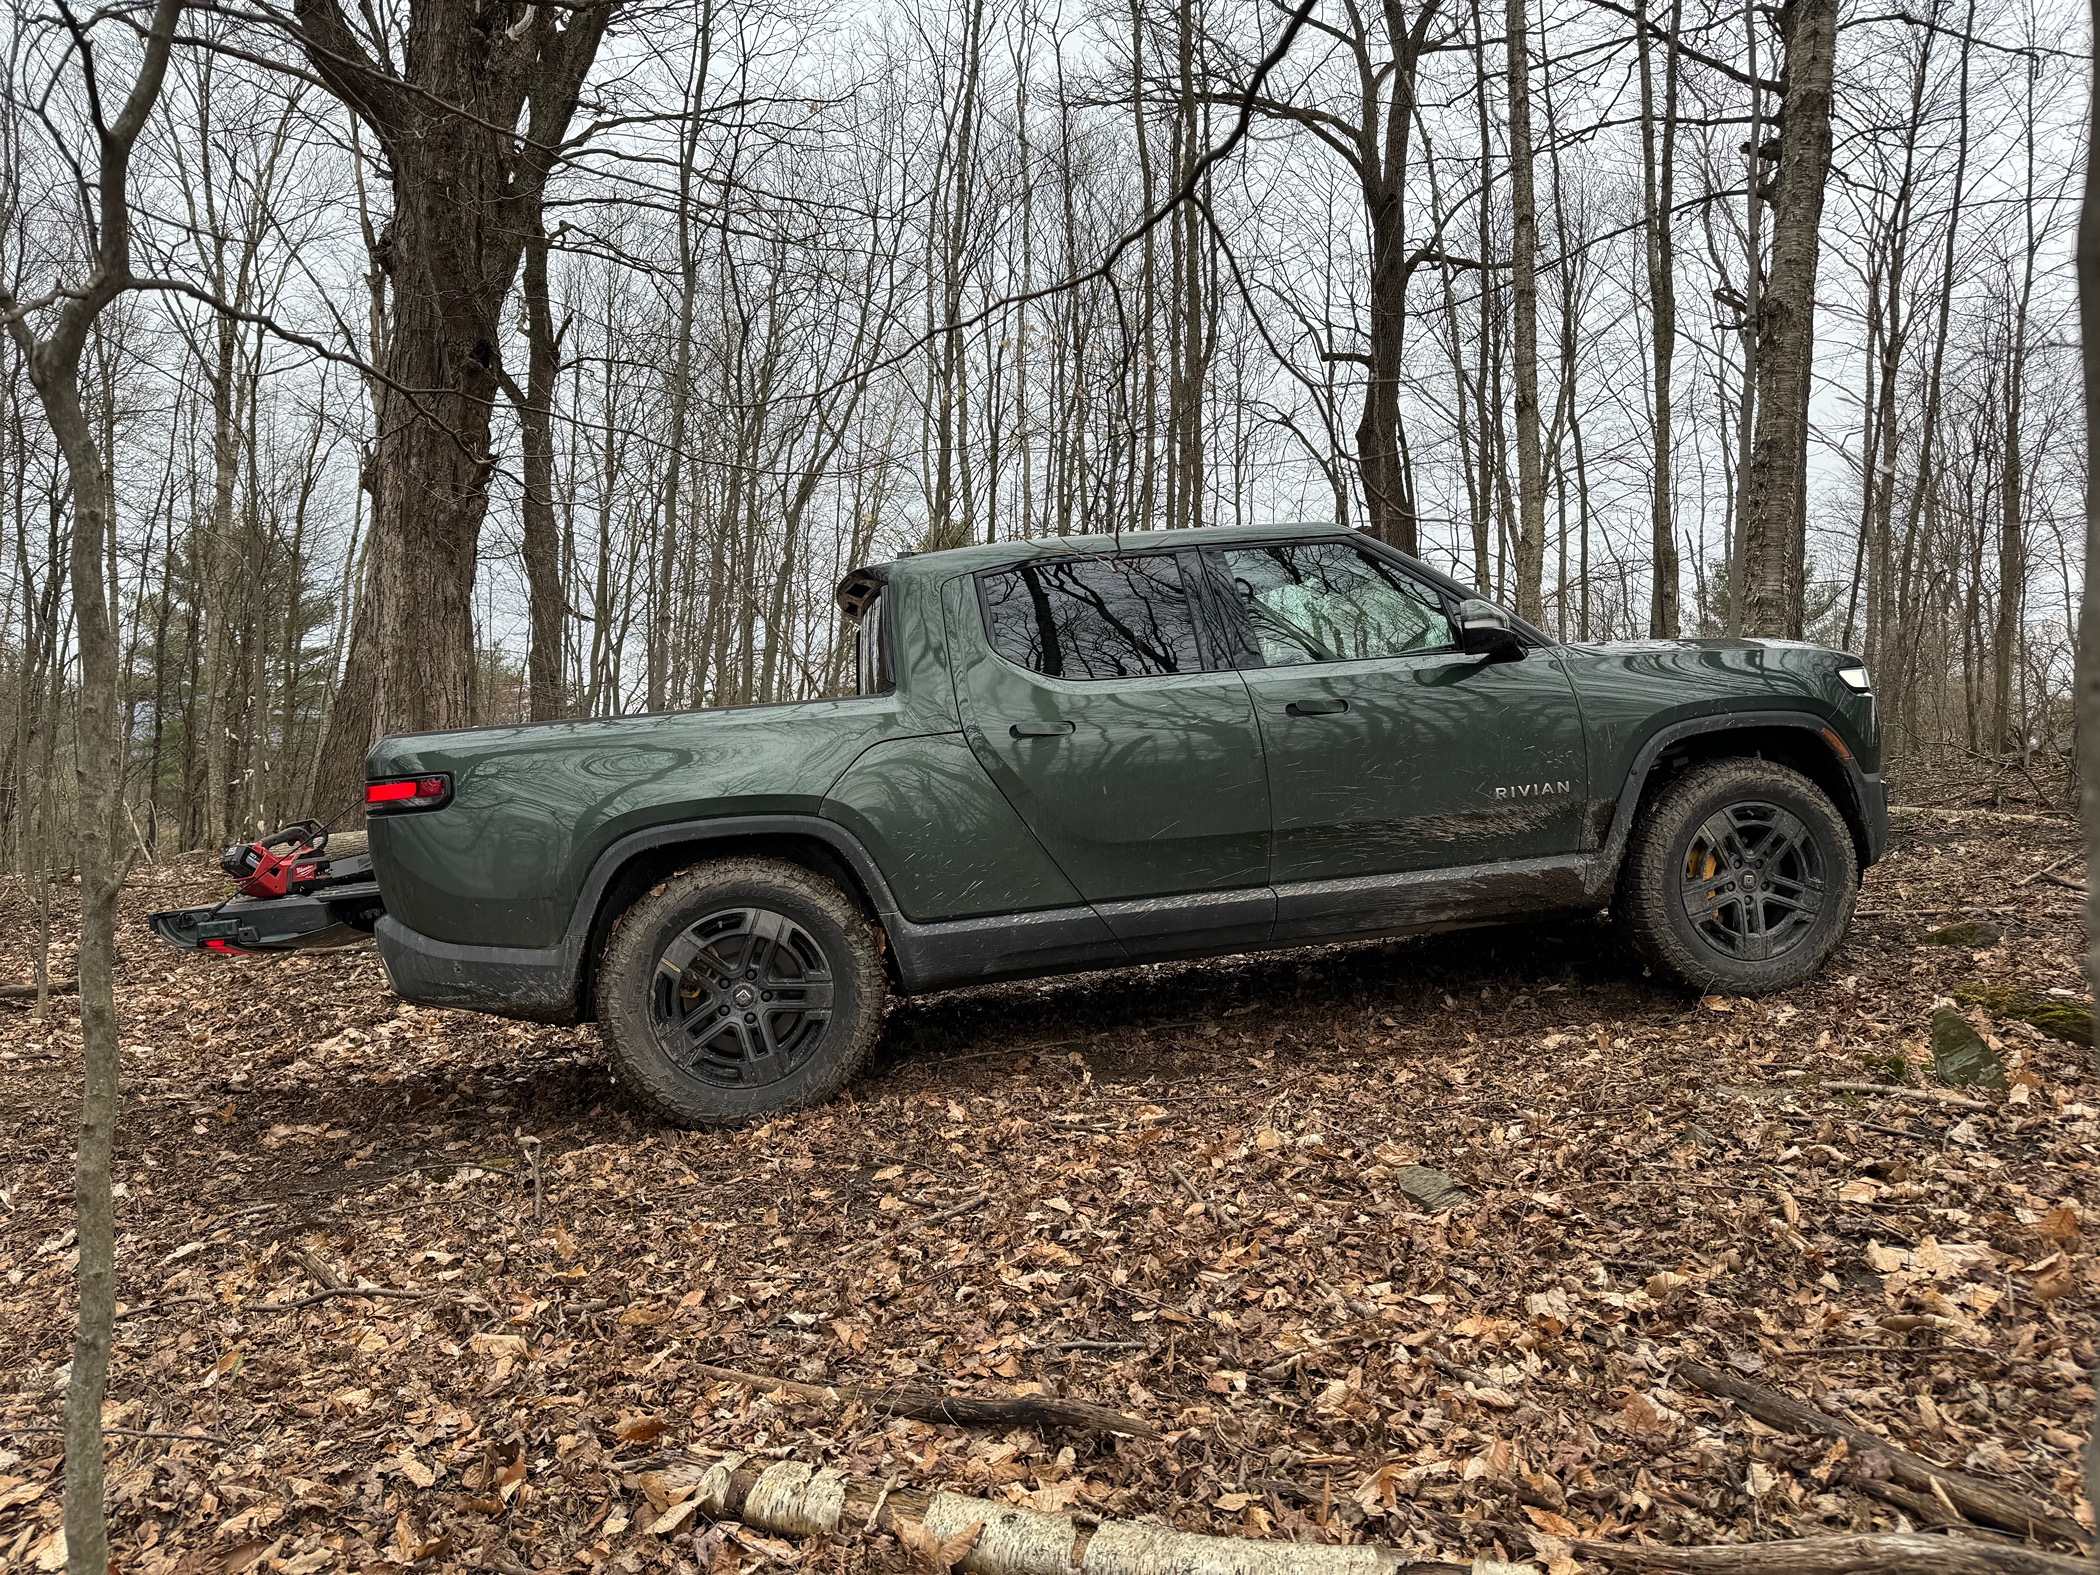 Rivian R1T R1S Random Rivian Photos of the Day - Post Yours! 📸 🤳 IMG_0838